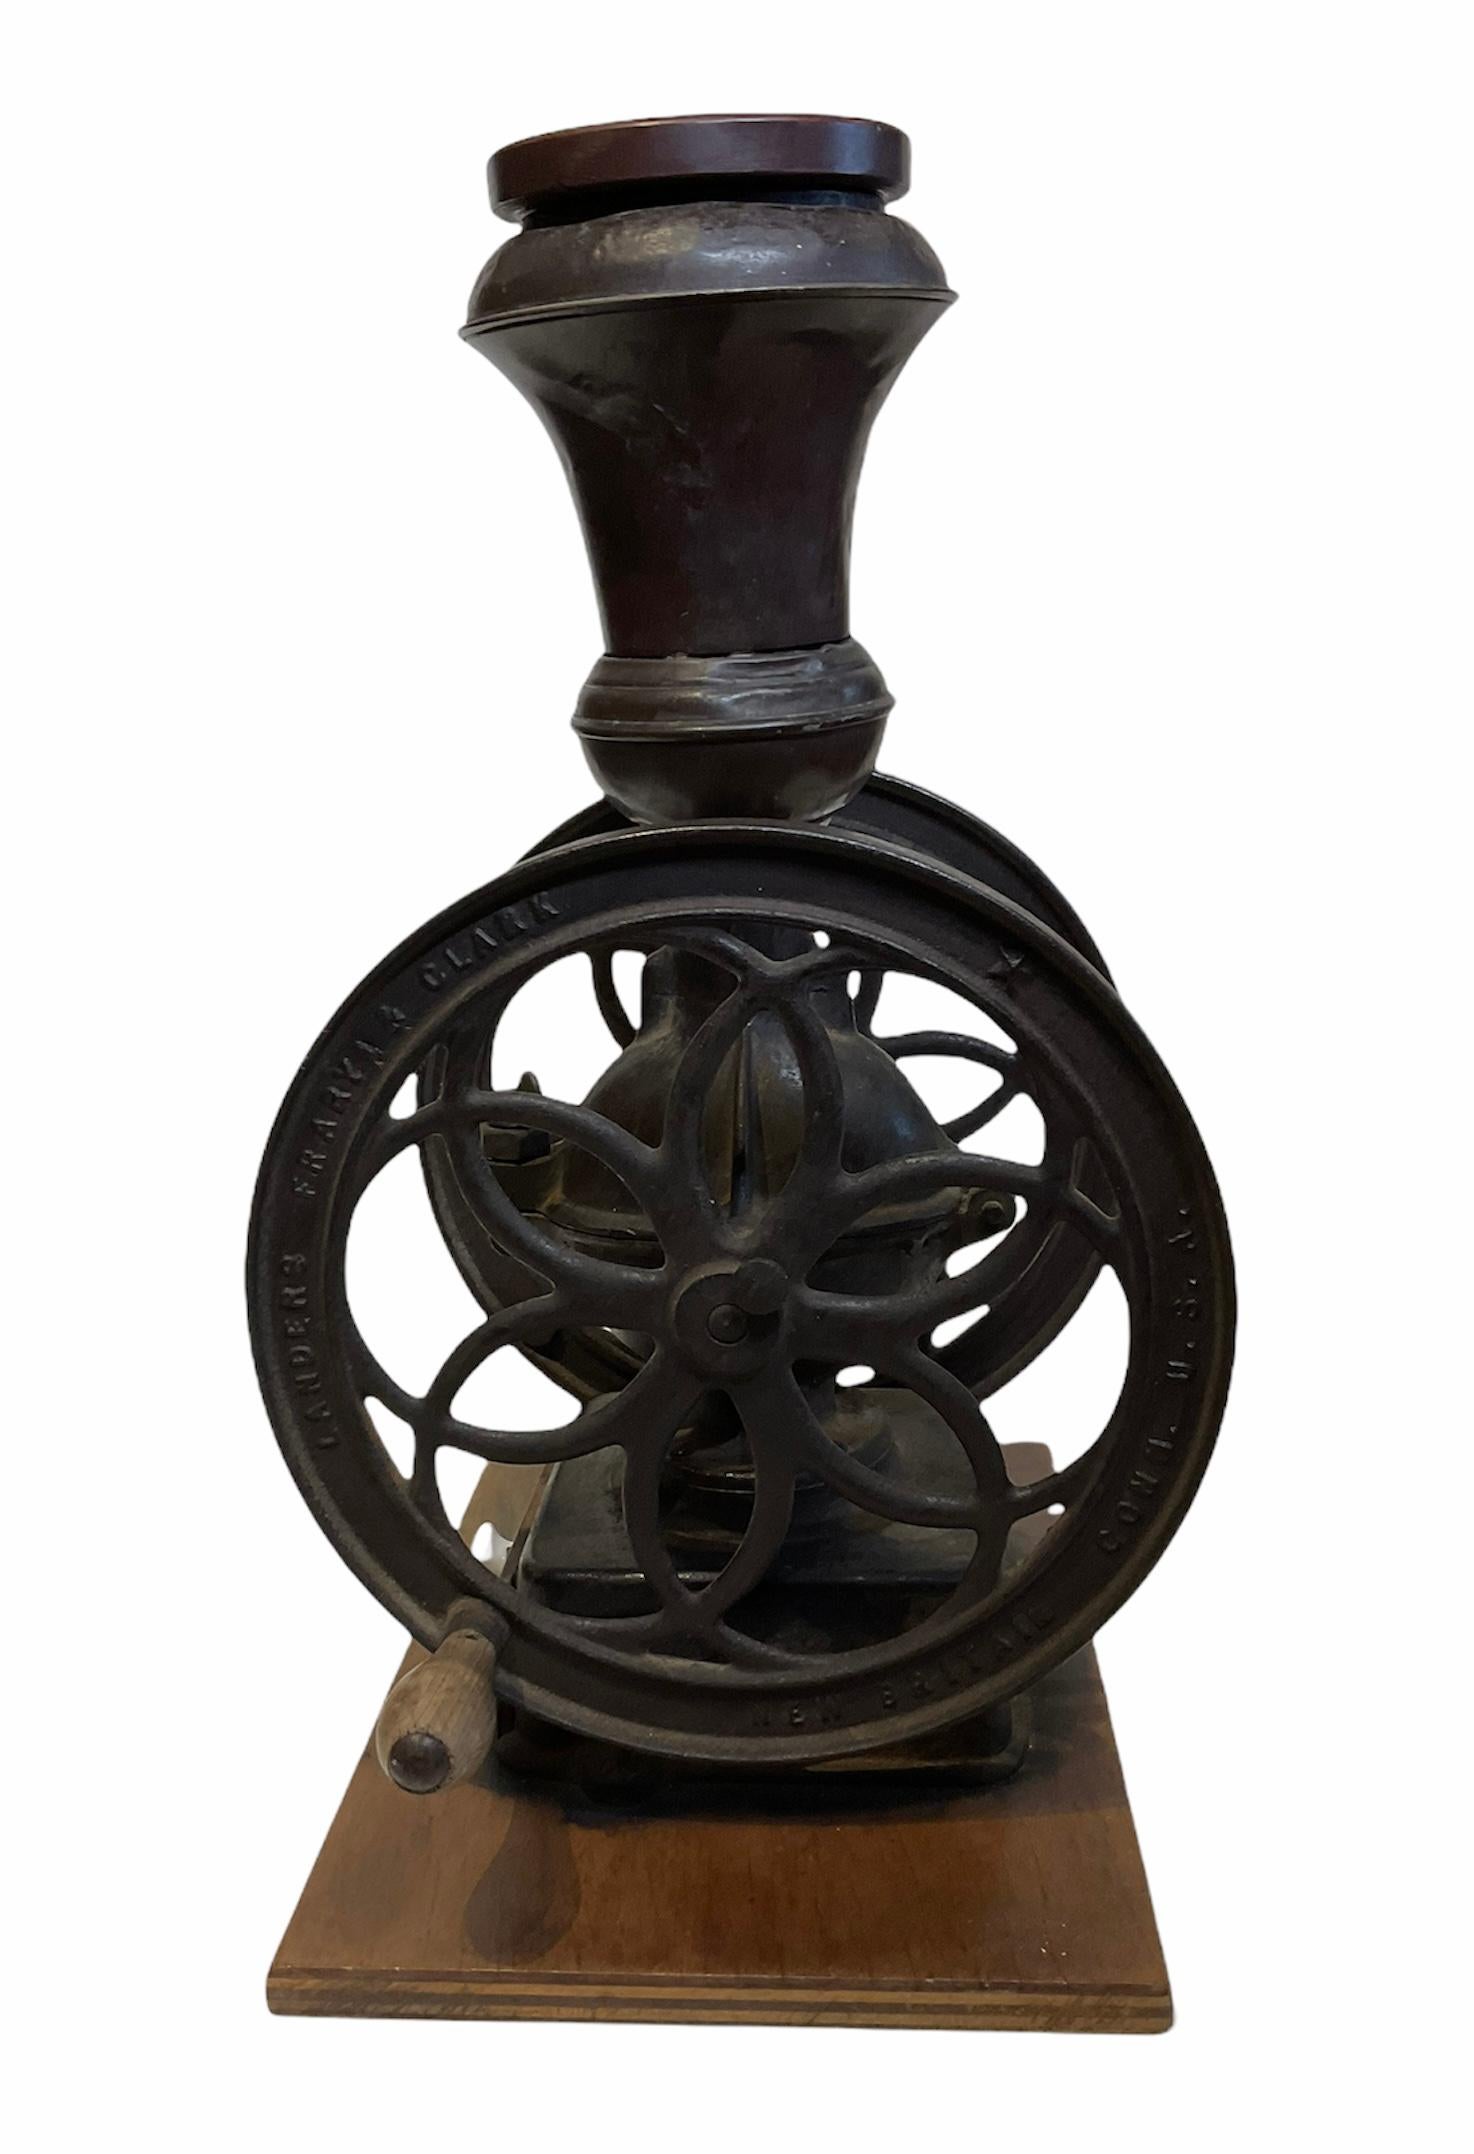 This a large and heavy Landers, Frary & Clark cast iron coffee grinder#20 1/2. It has a bell shaped nickel hopper with a flat wood lid and two flywheels adorned in the center with a six petals pierced flower. Also, they have written in raised